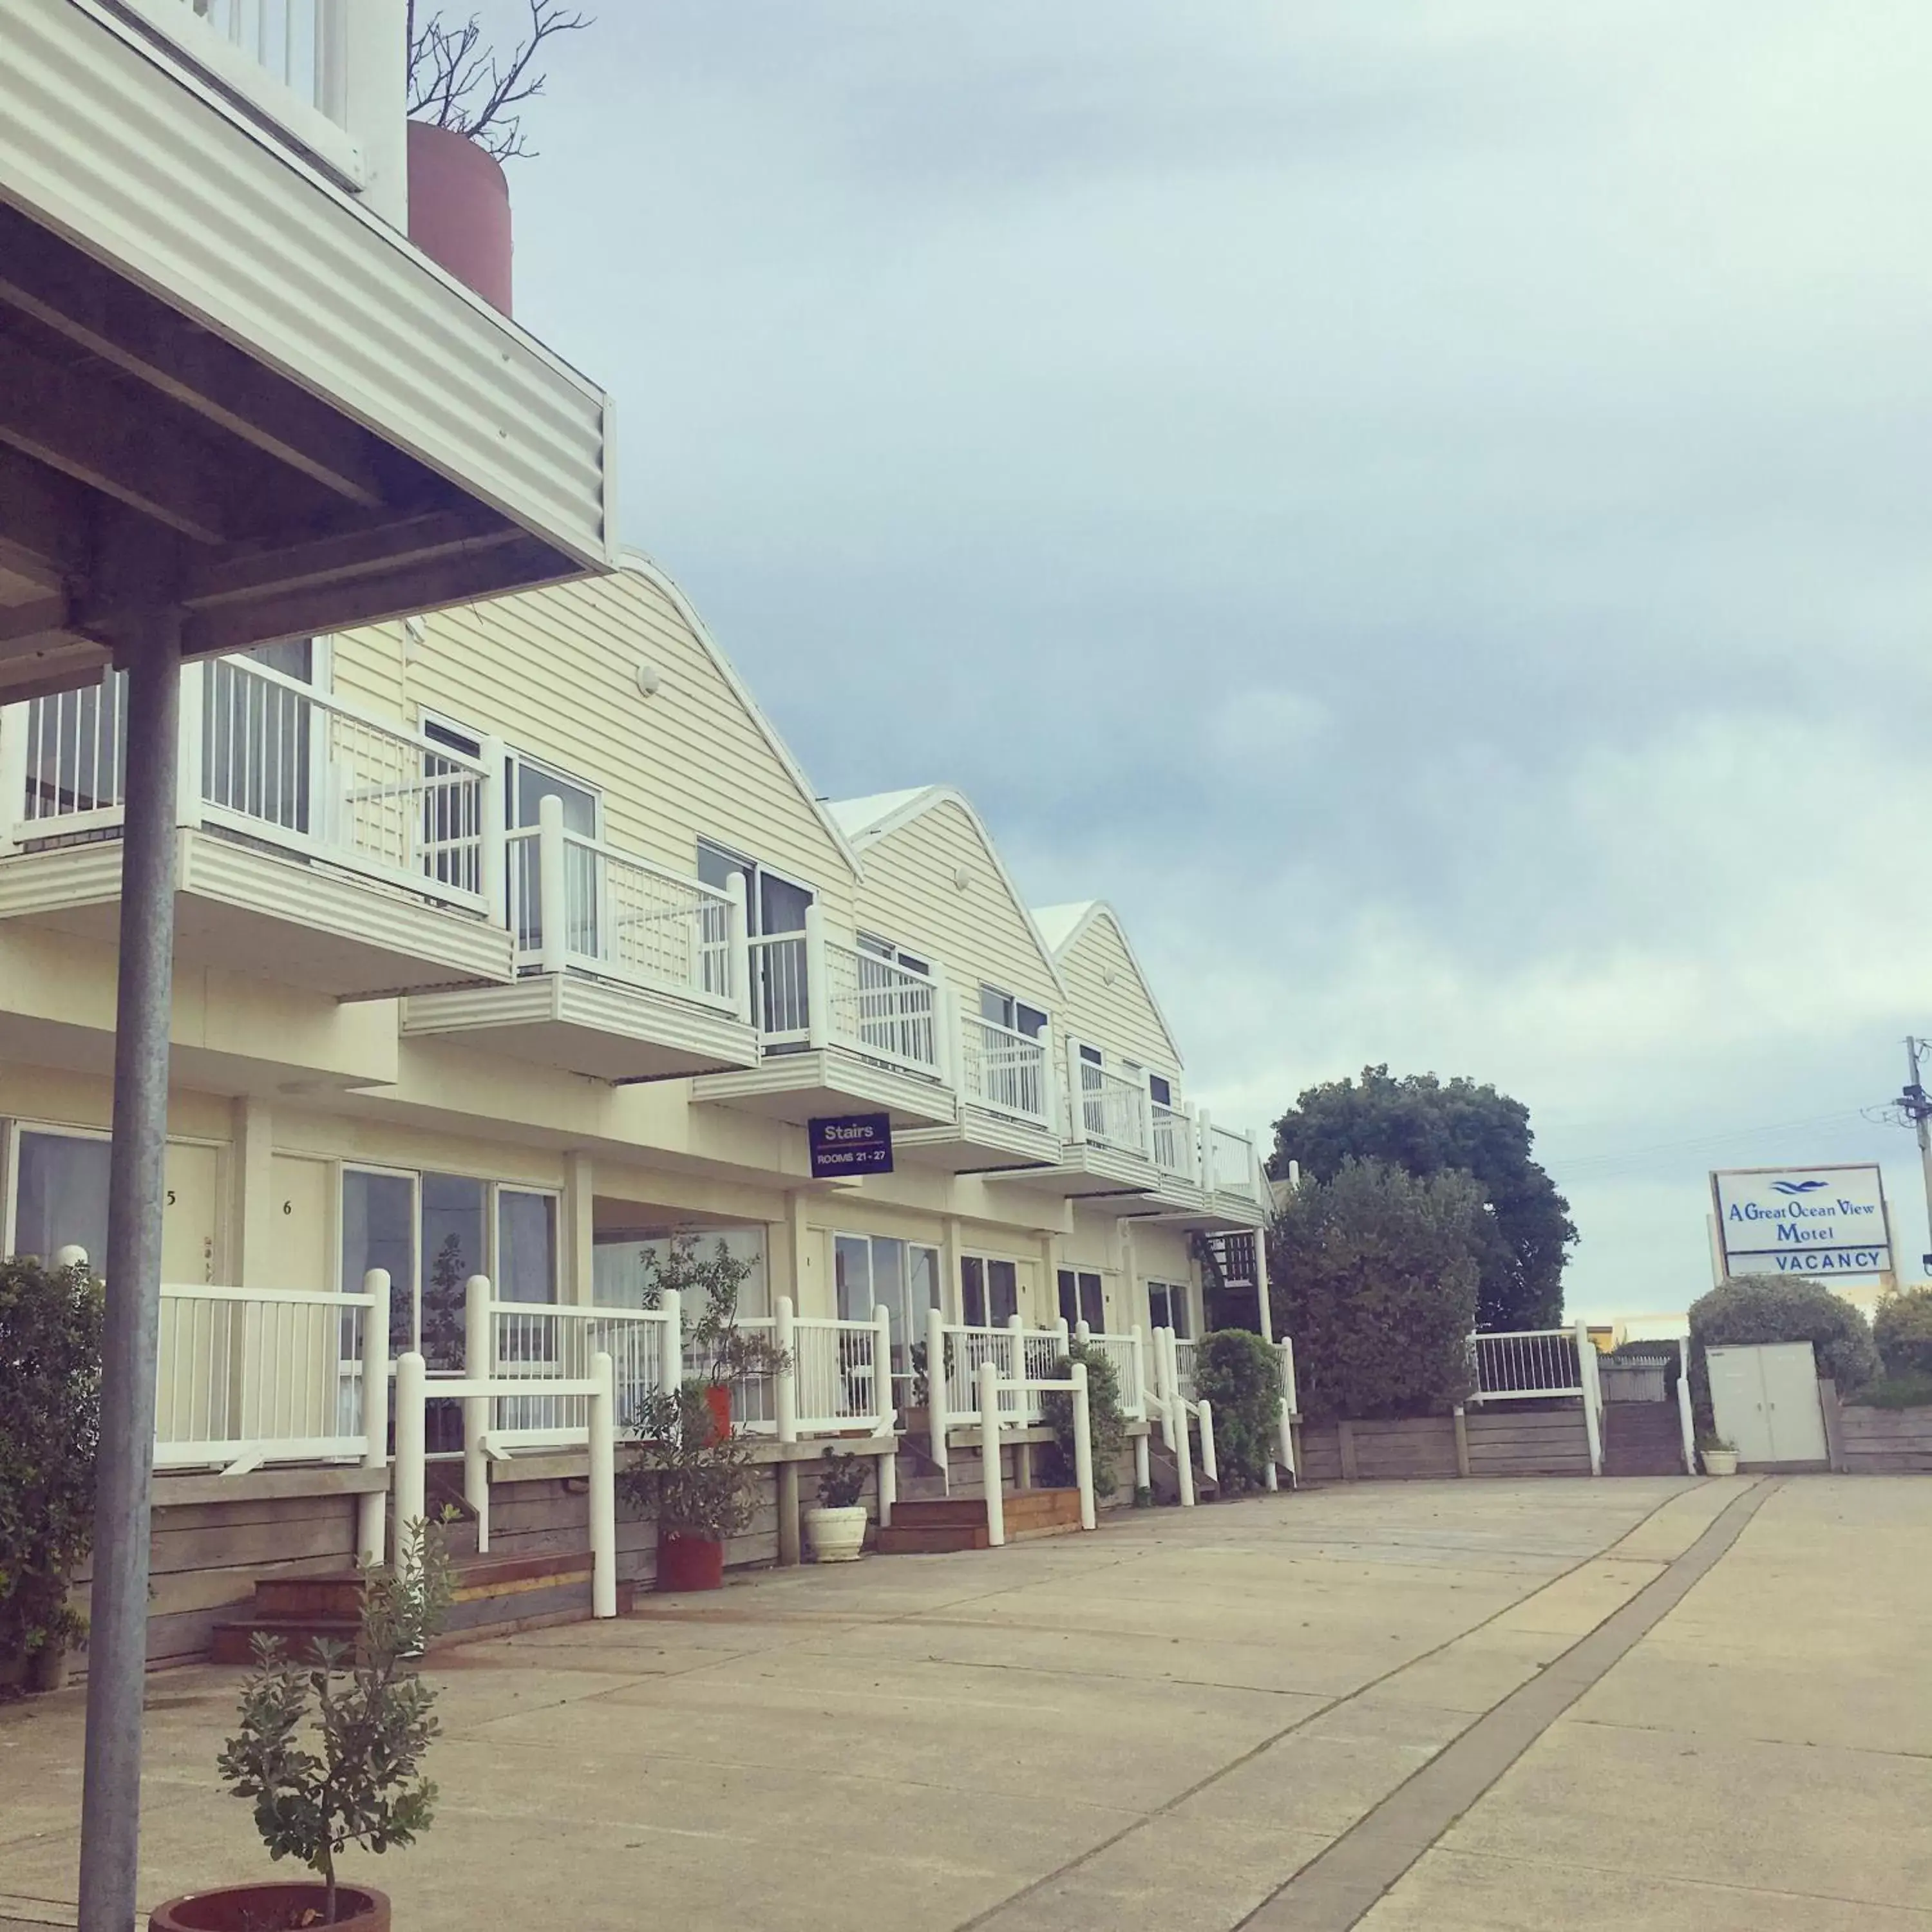 Property Building in A Great Ocean View Motel